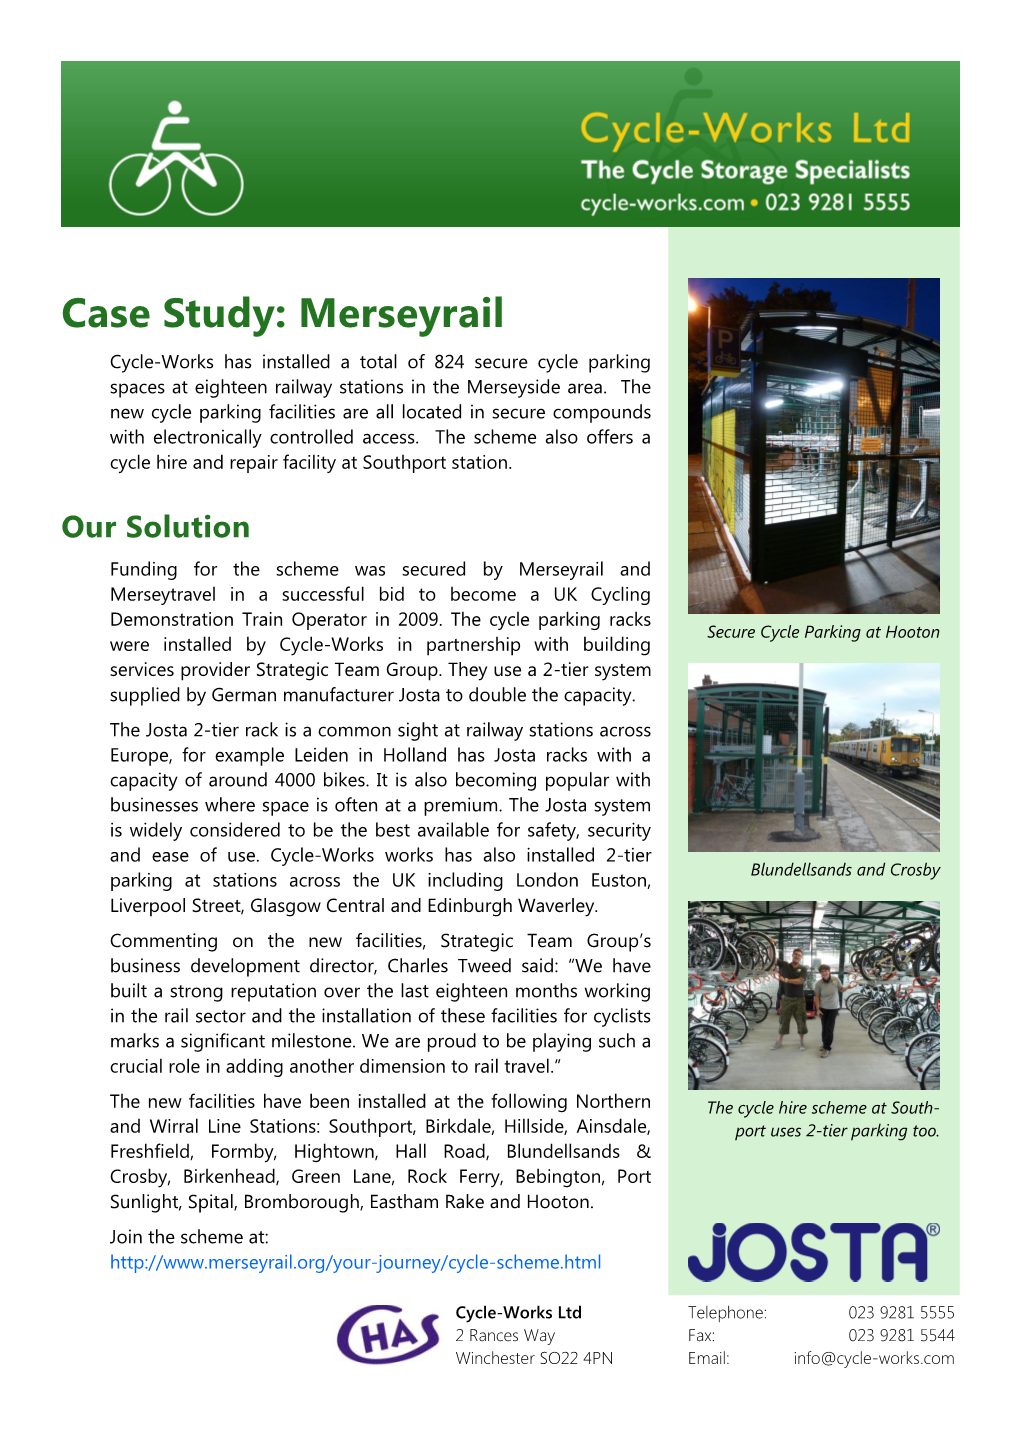 Case Study: Merseyrail Cycle-Works Has Installed a Total of 824 Secure Cycle Parking Spaces at Eighteen Railway Stations in the Merseyside Area